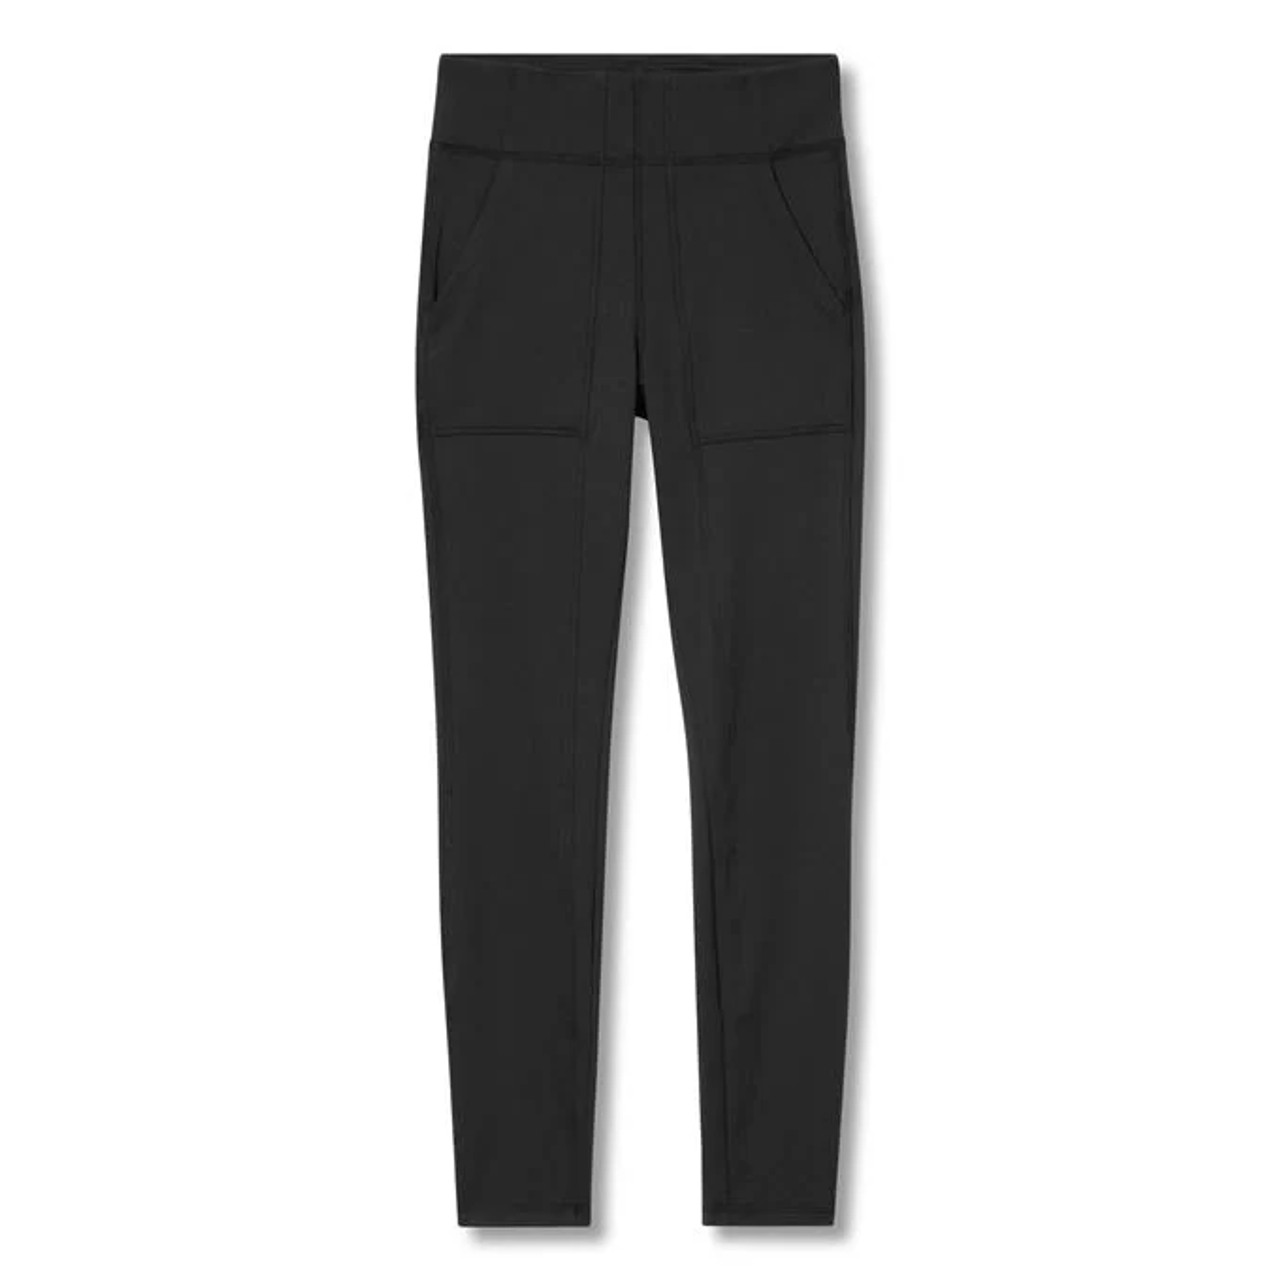 Women's Backcountry Pro Winter Legging - Chatham Outfitters